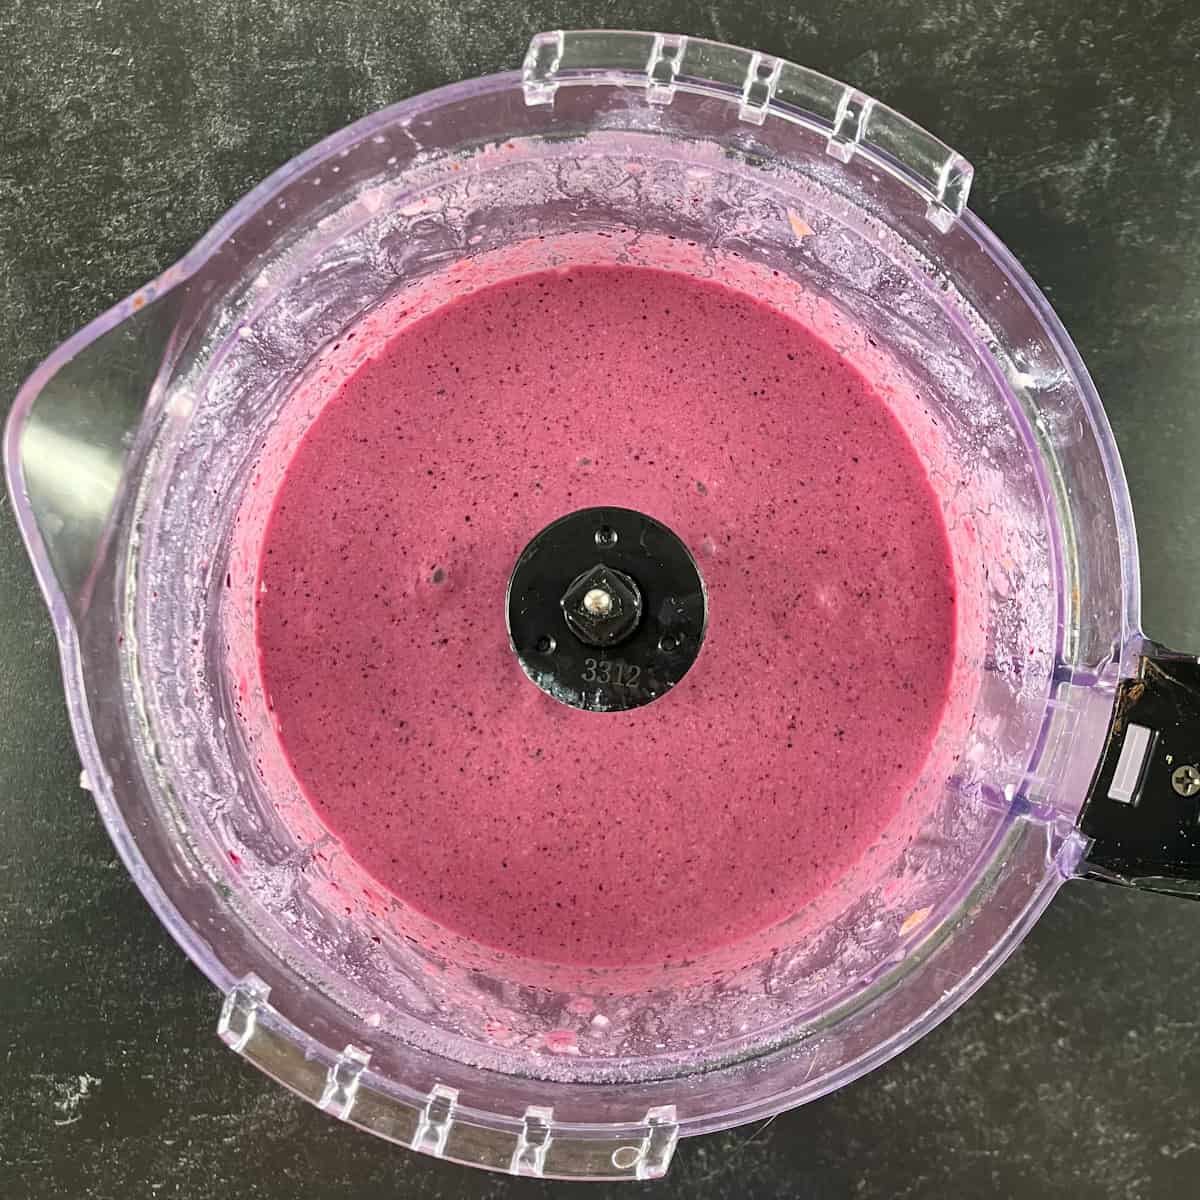 peach and blueberry smoothie